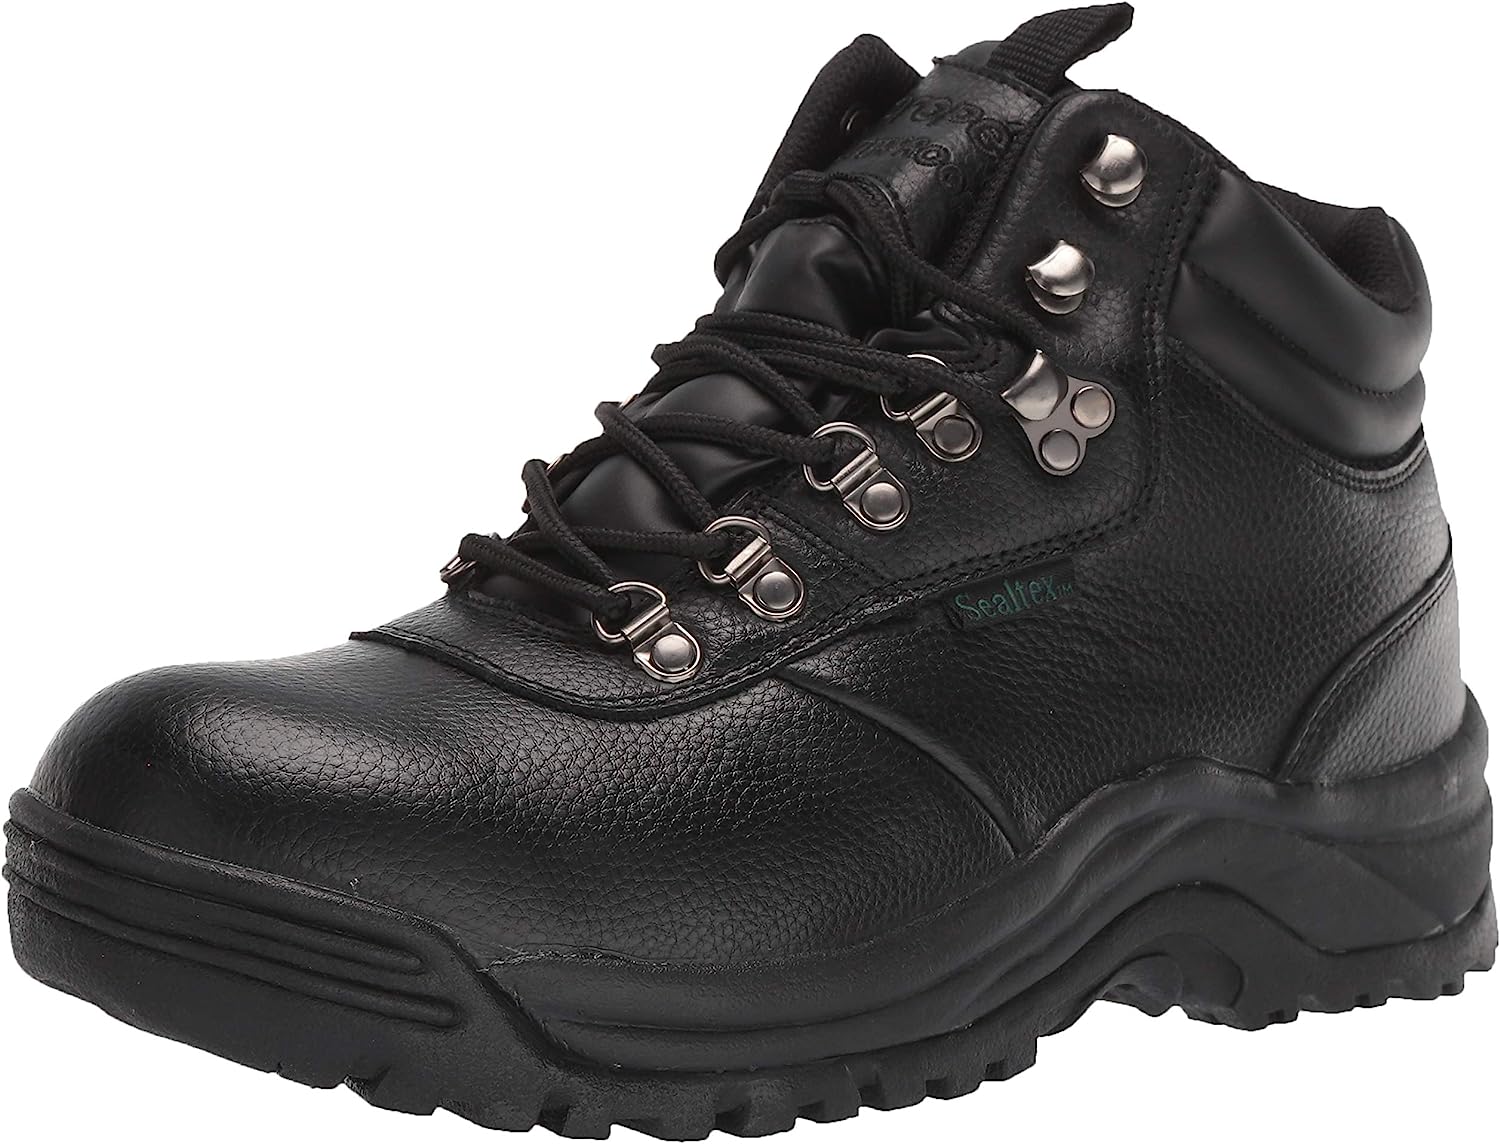 Propet Mens Cliff Walker Hiking Casual Boots Ankle - Black